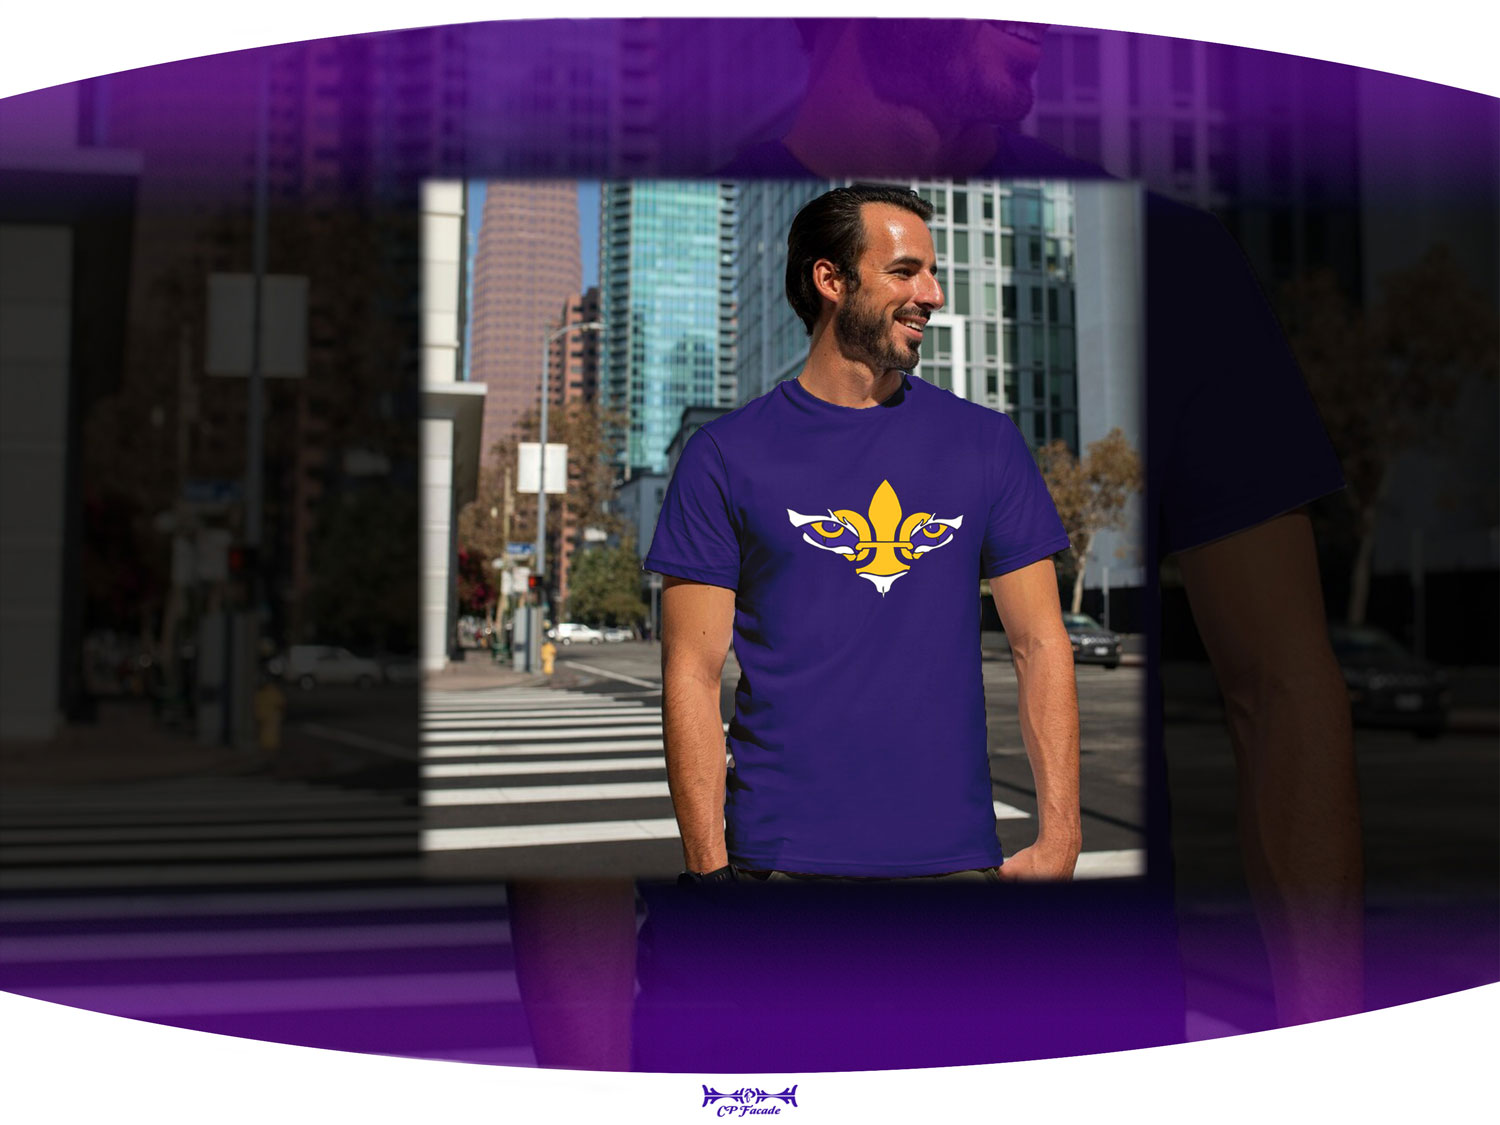 Man smiling standing in the street wearing LSU t-shirt with a gold and white fleur de lis with tiger eyes on the chest